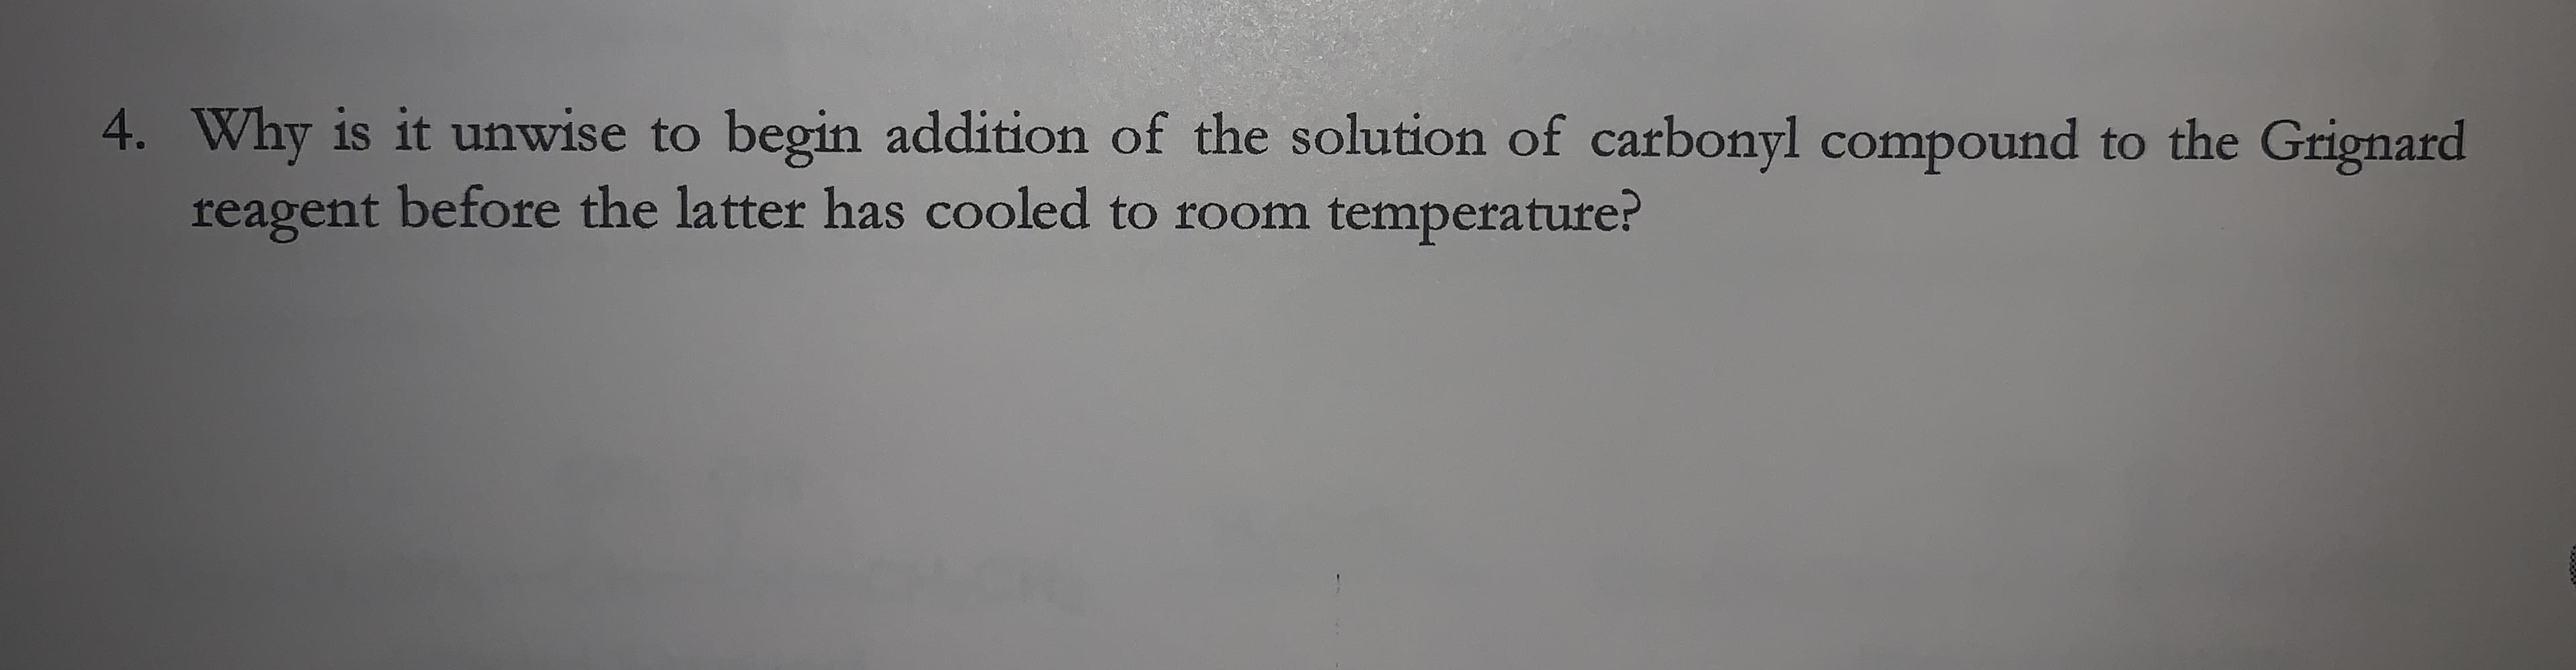 4. Why is it unwise to begin addition of the solution of carbonyl compound to the Grignard
reagent before the latter has cooled to room temperature?
